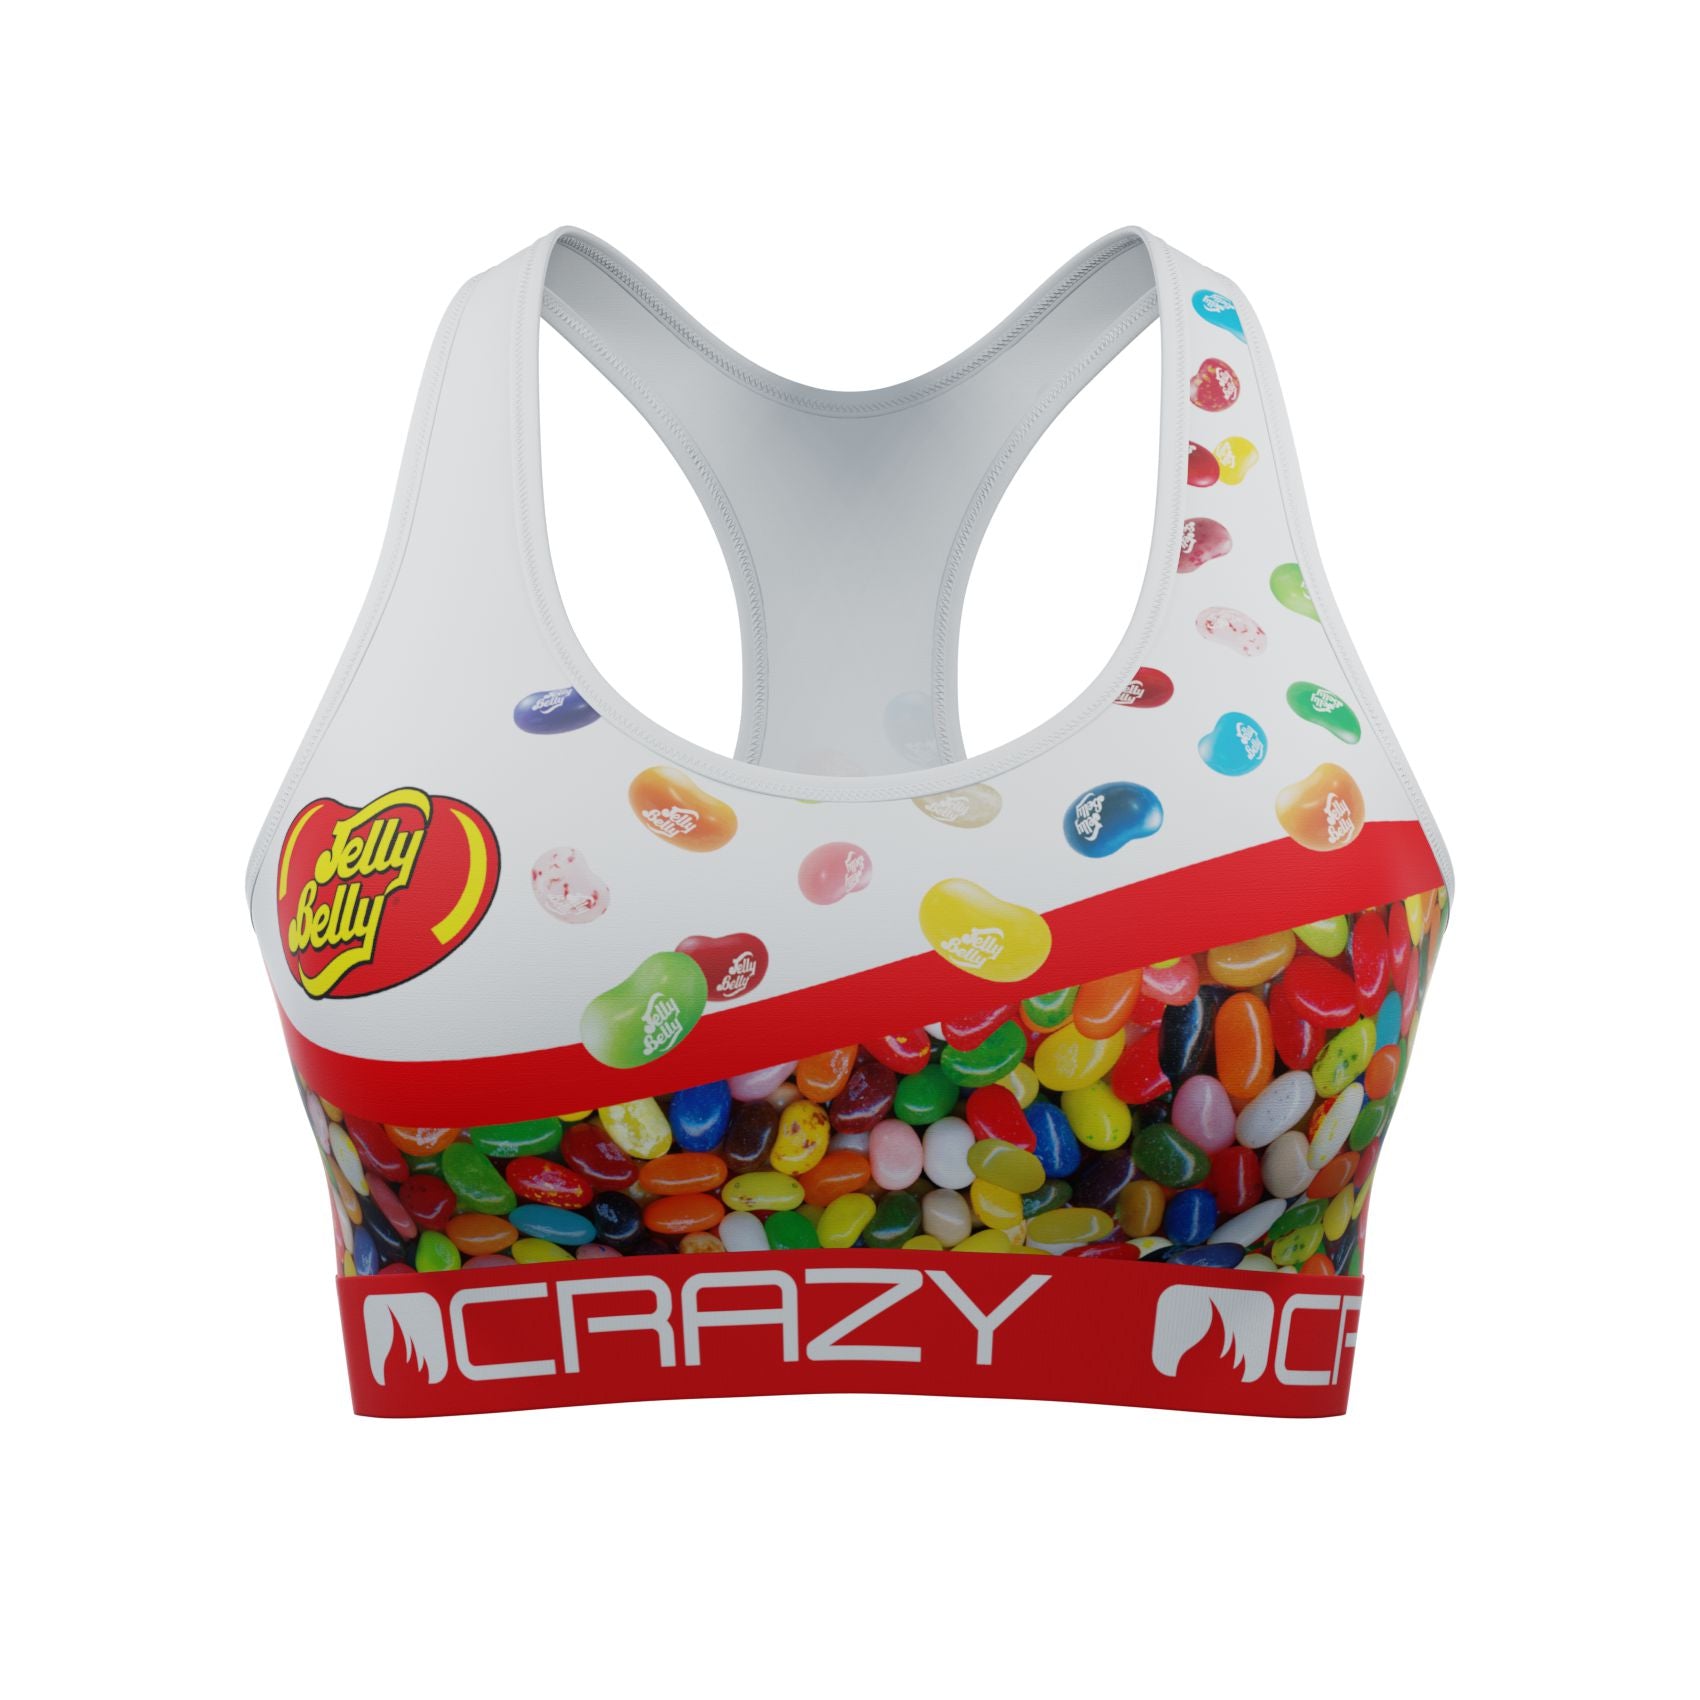 CRAZYBOXER Jelly Belly Women's Sports Bra